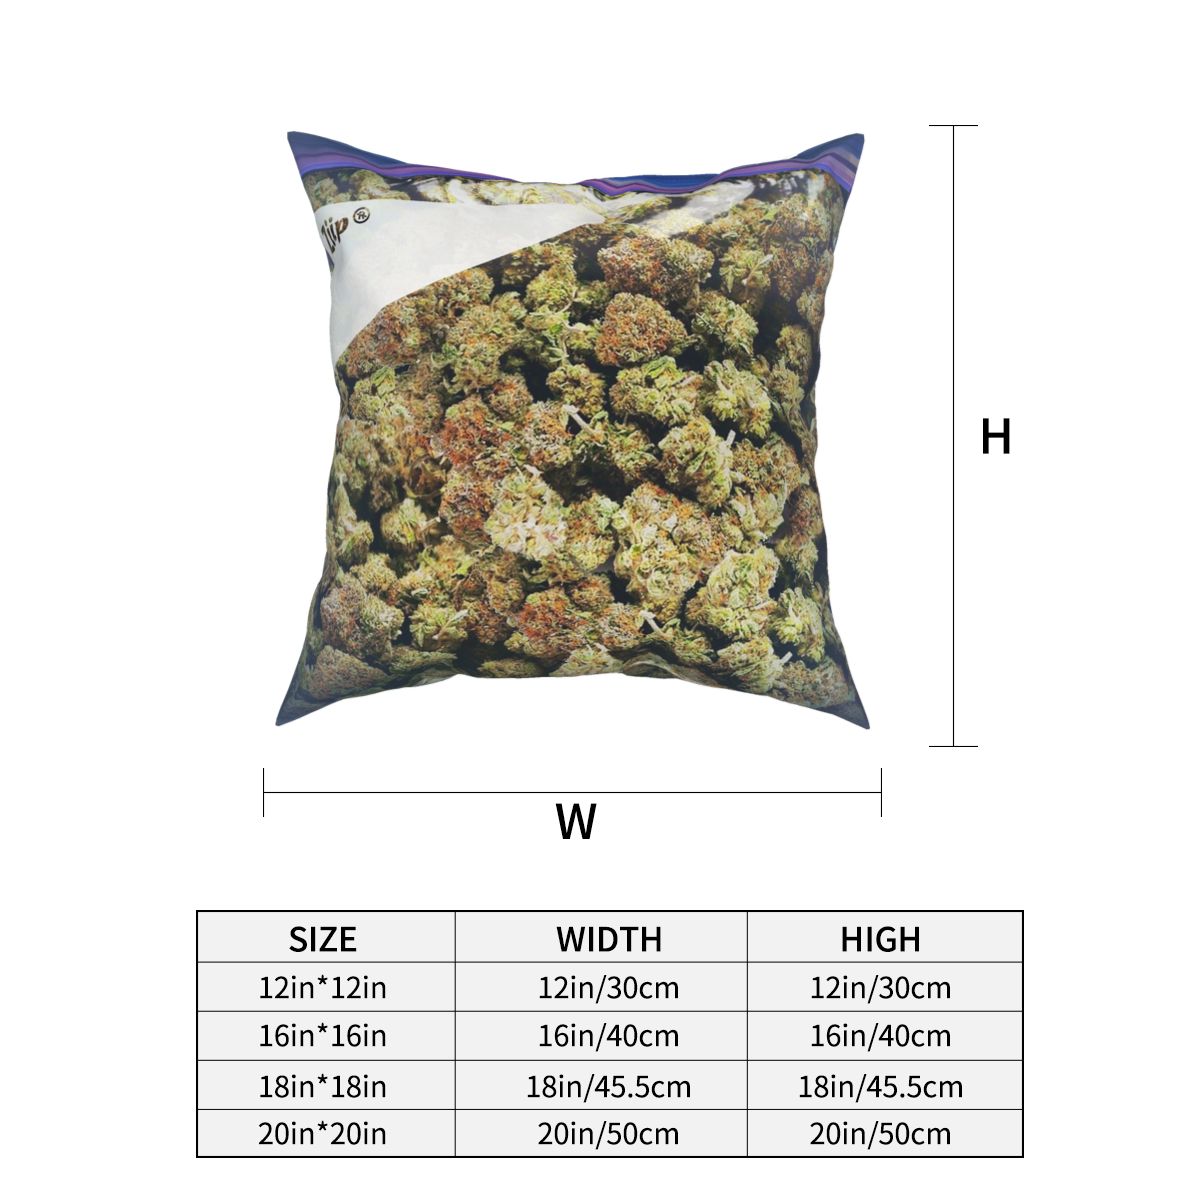 Weed Zip Lock Cannabis Extra Large Square Pillowcase